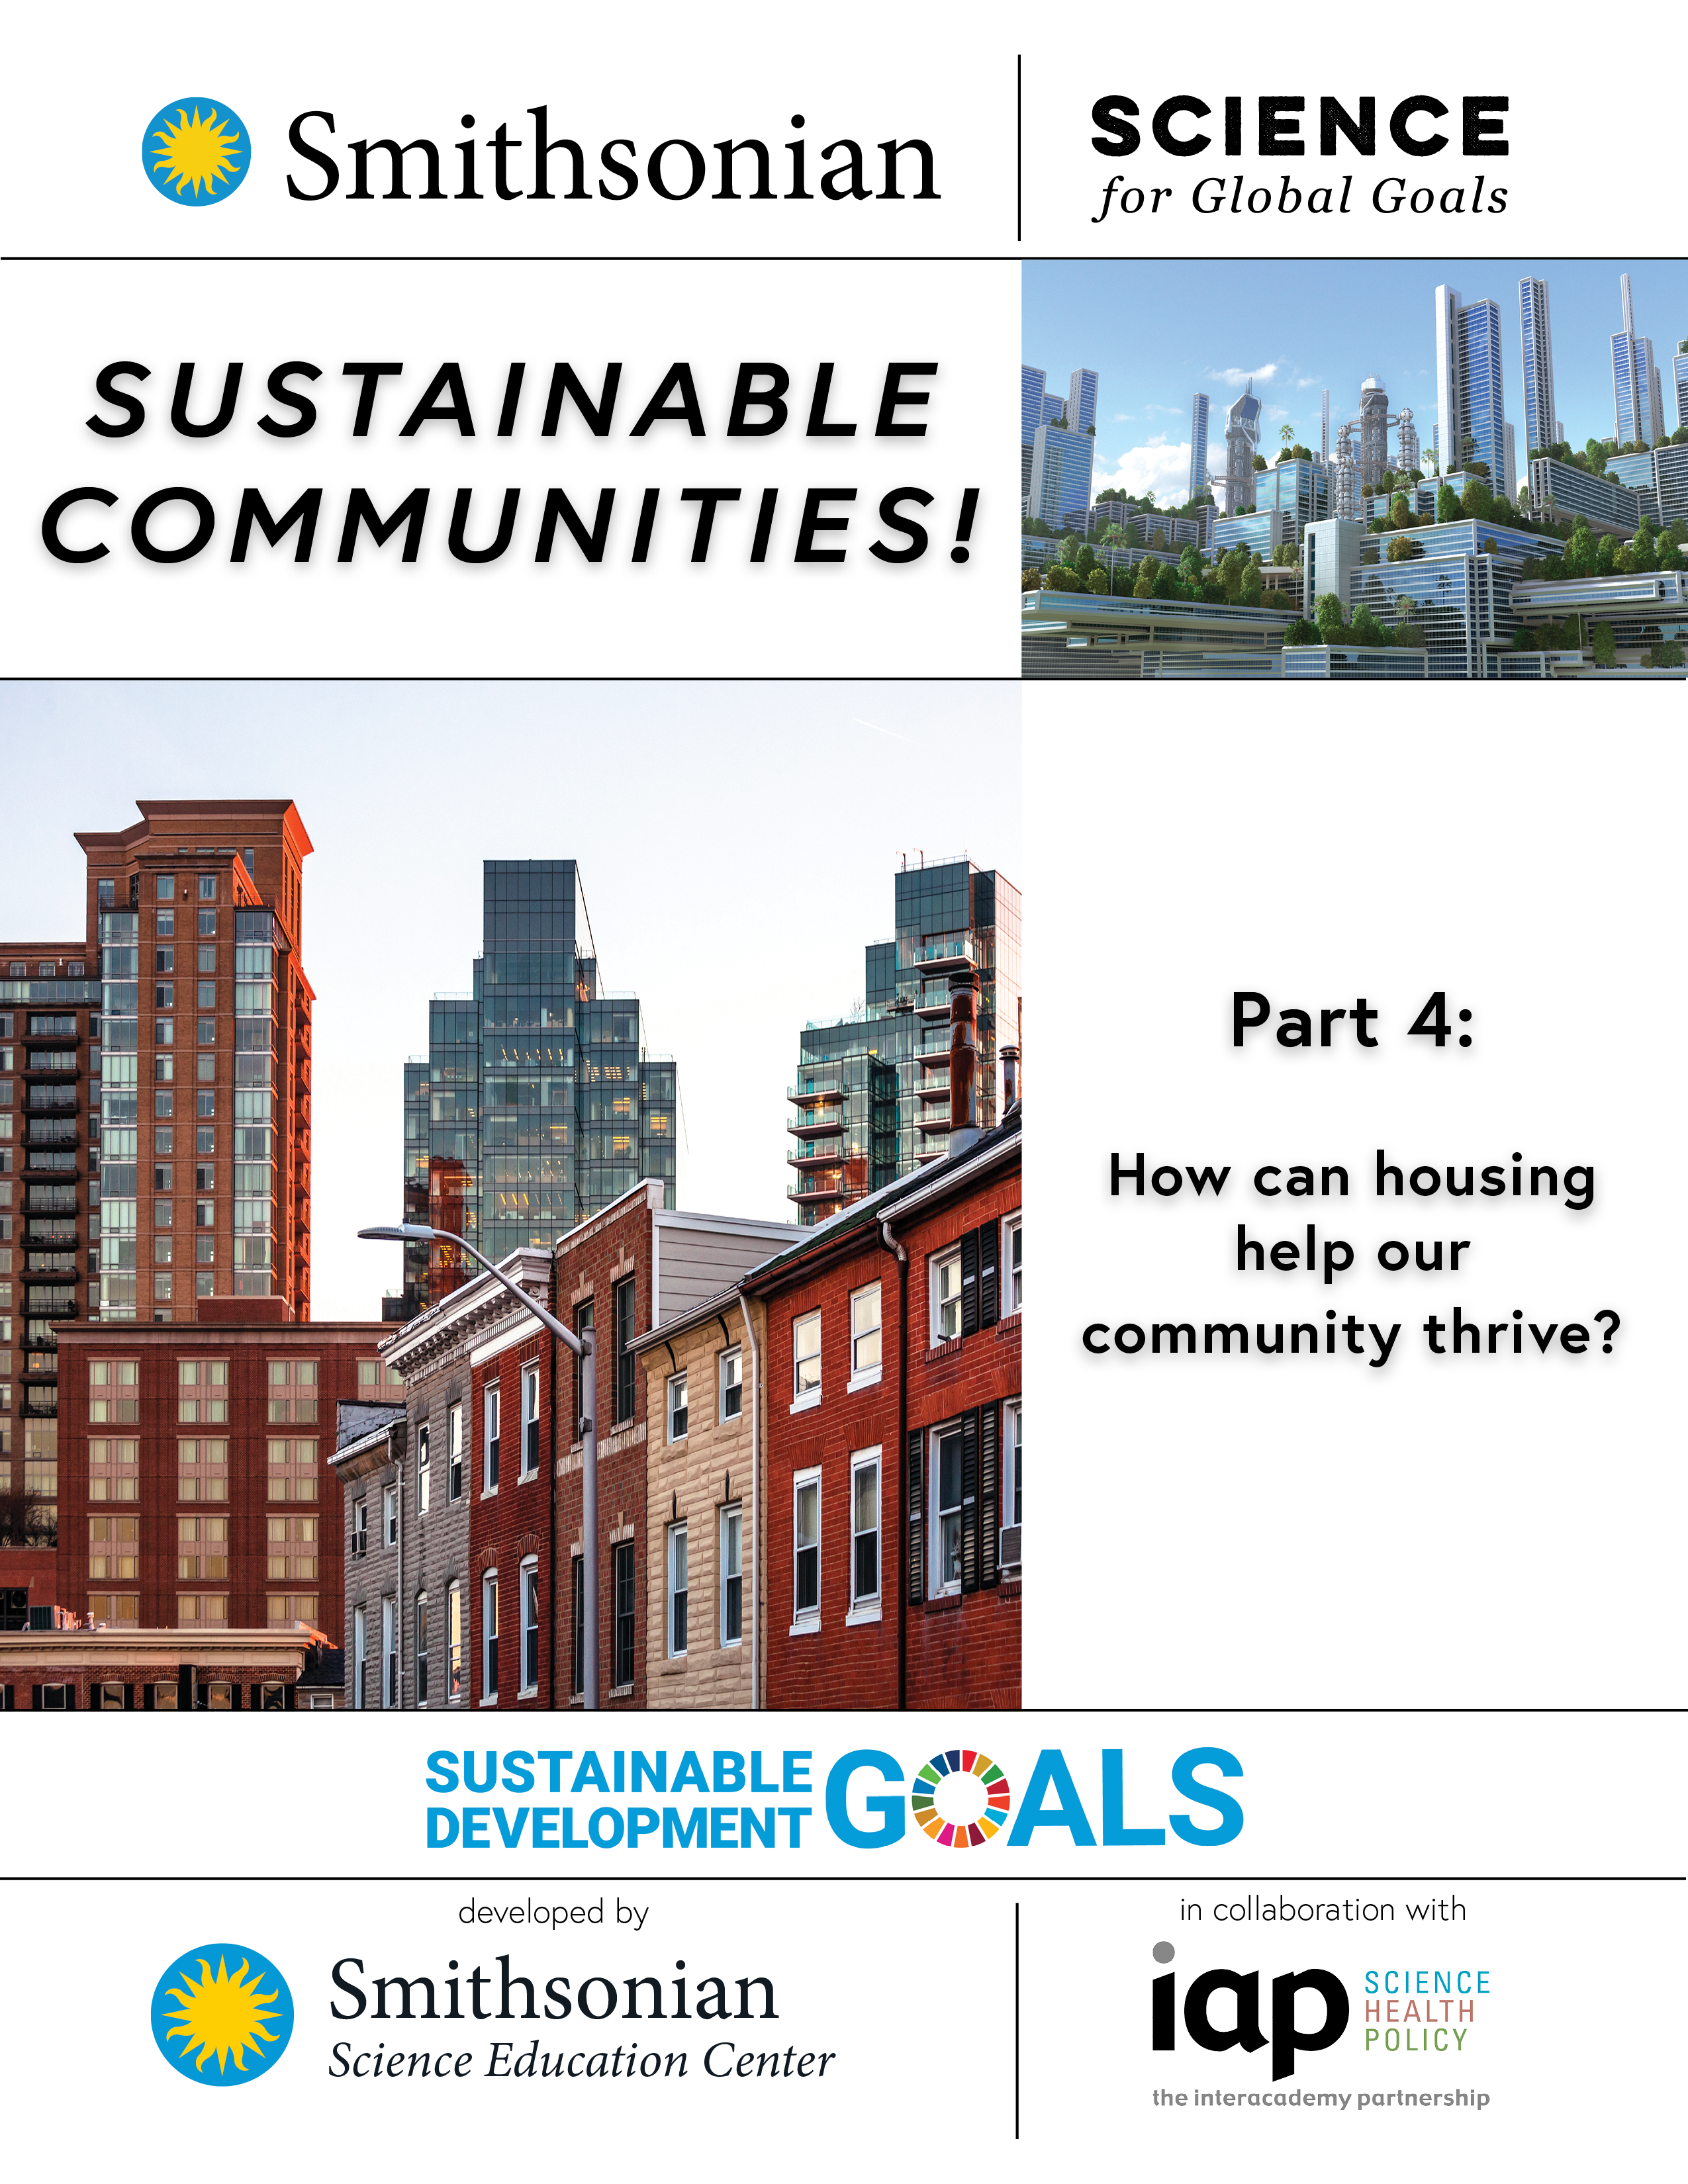 Part 4 for Sustainable Communities